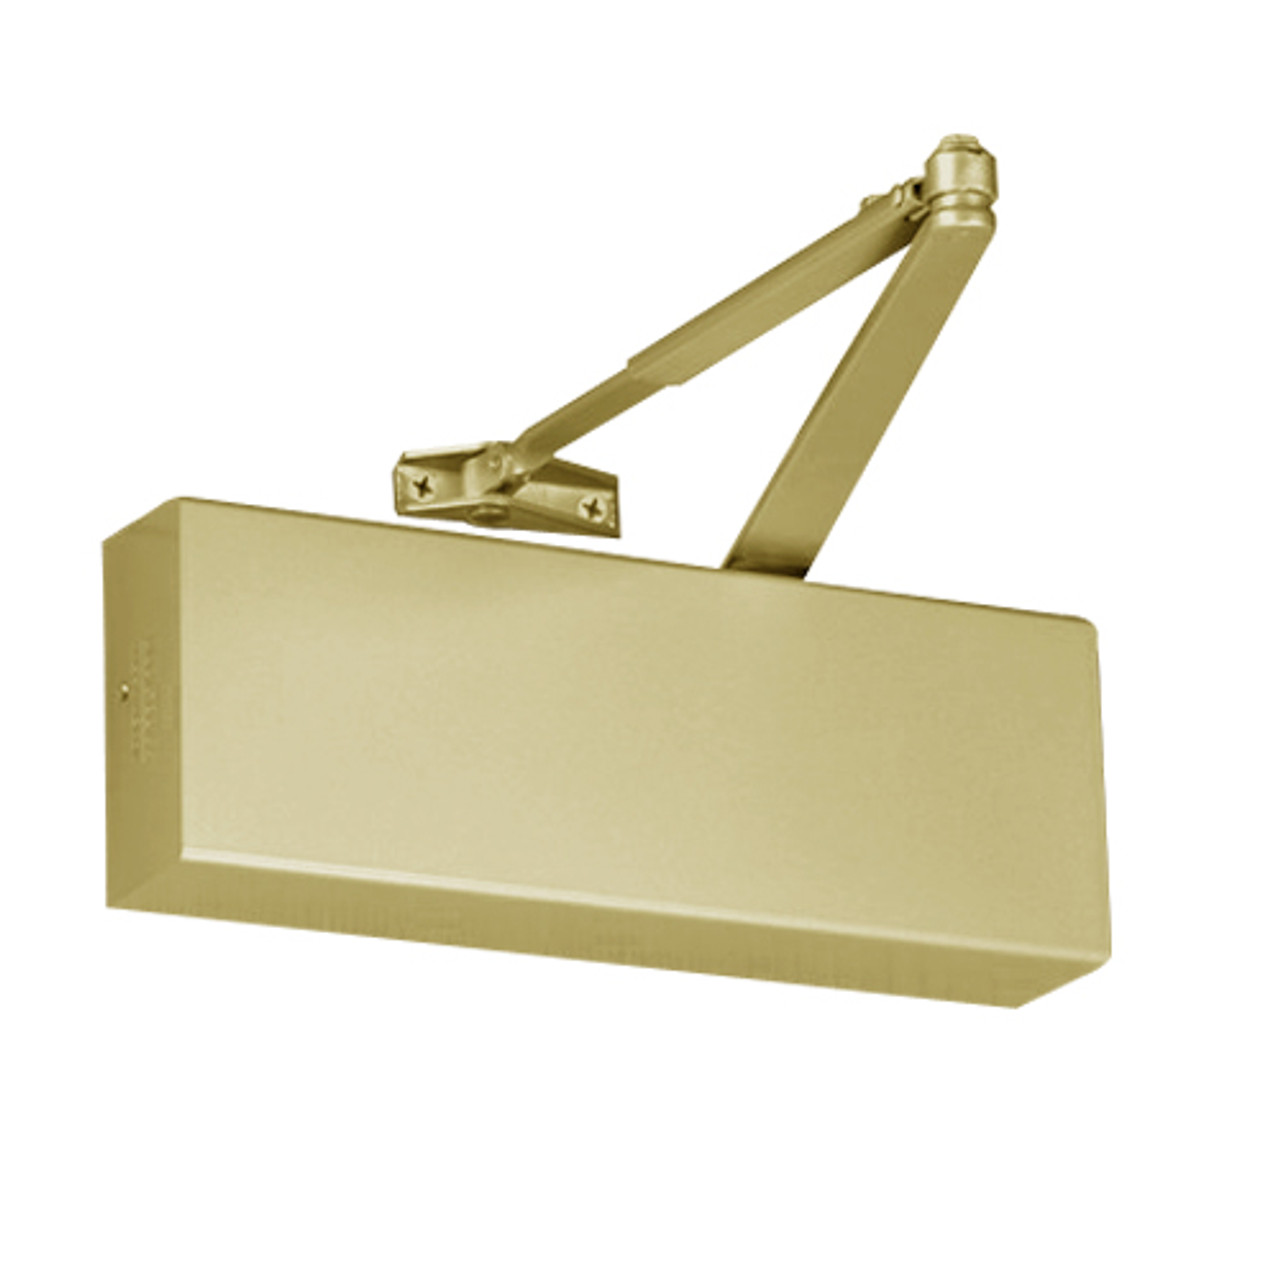 9500DA-696 Norton 9500 Series Non-Hold Open Cast Iron Door Closer with Regular Arm Parallel or Top Jamb to 3 inch Reveal in Gold Finish